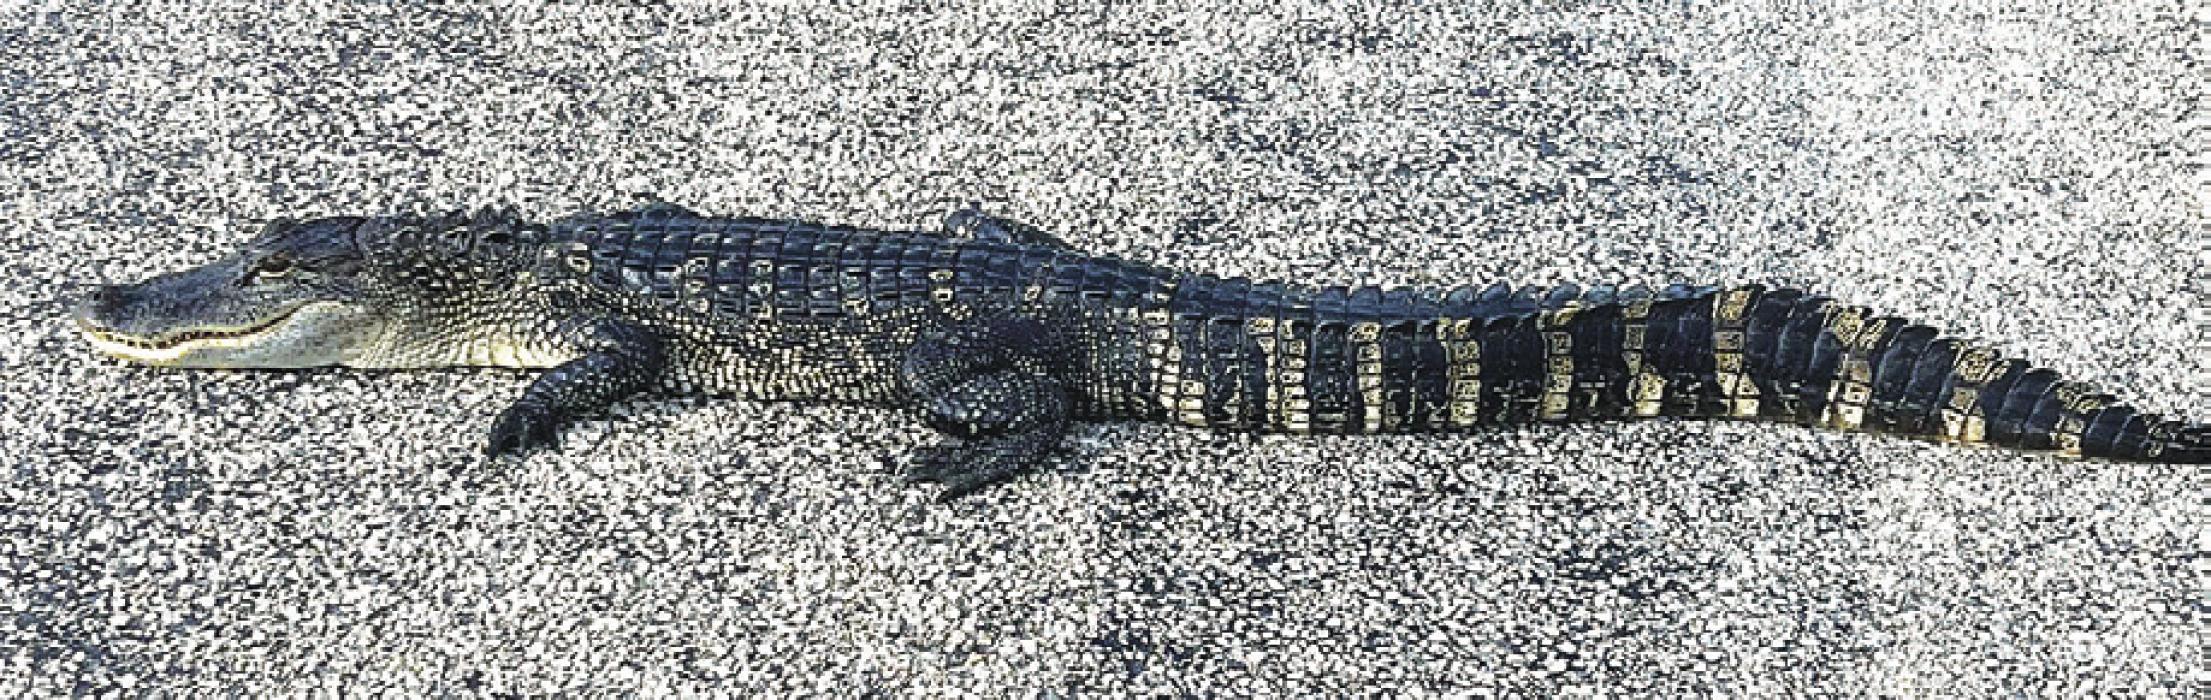 Allan Minarcik snapped this photo of the alligator that several people saw on FM 2145 between La Grange and Nechanitz on Monday.